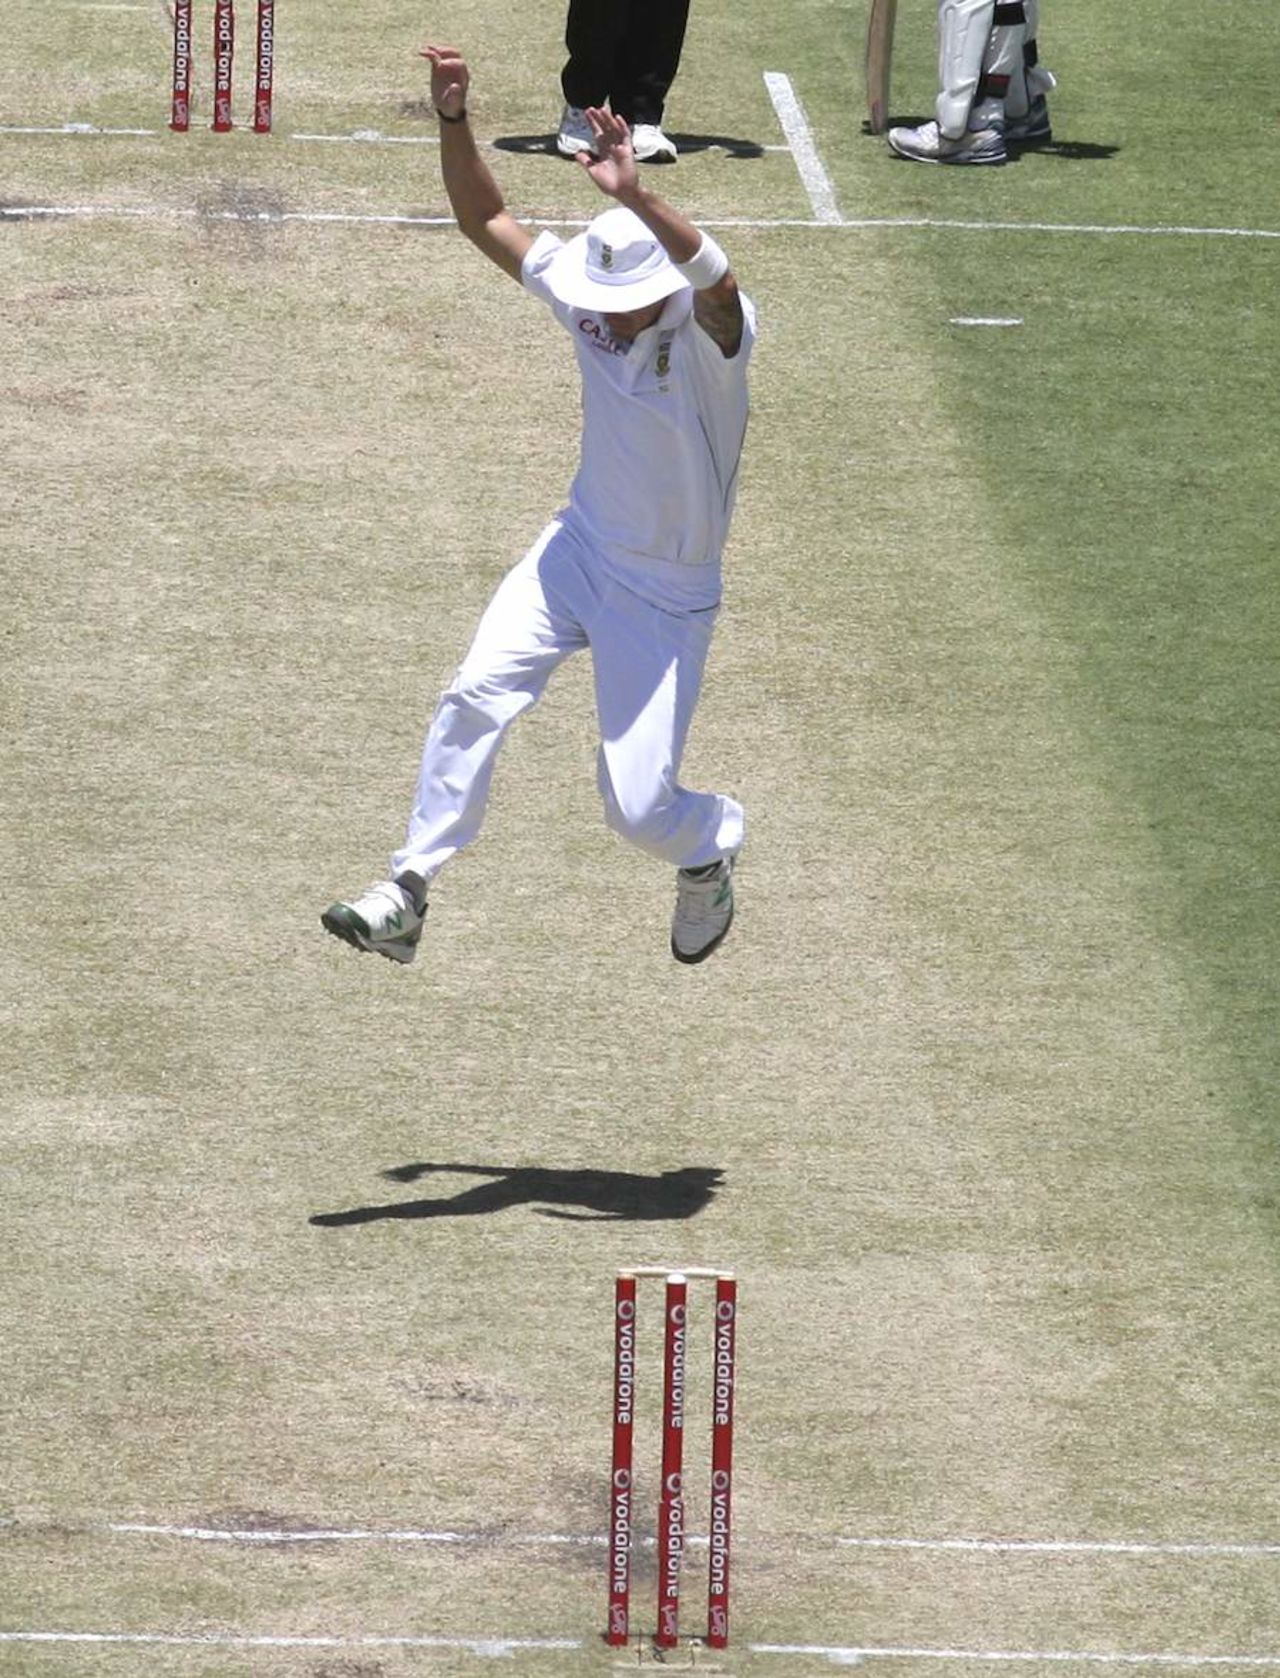 Dale Steyn jumps over the pitch while celebrating a wicket, Australia v South Africa, 3rd Test, 2nd day, Perth, December 1, 2012